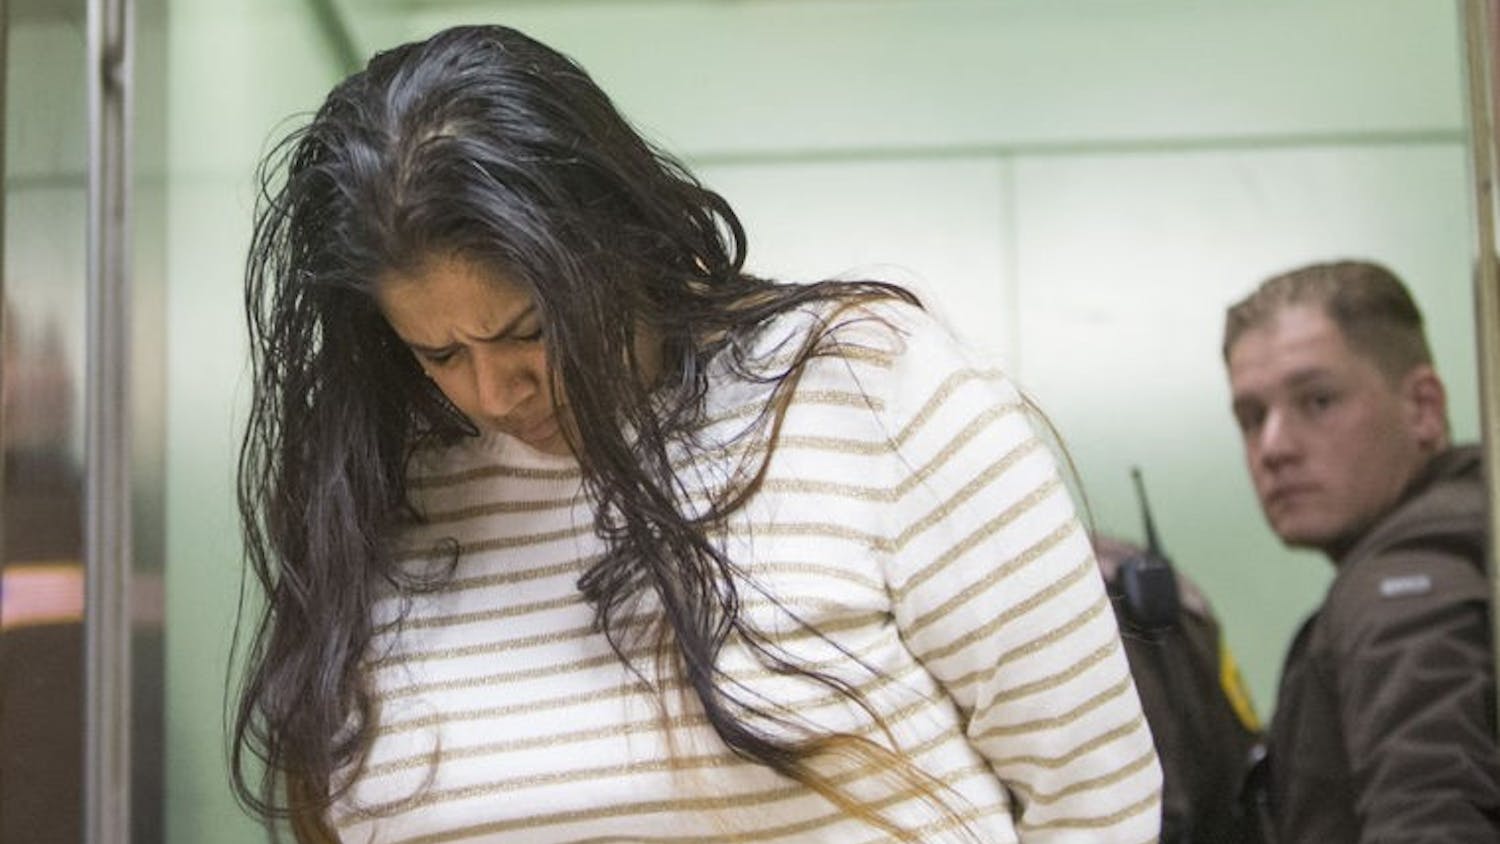 Purvi Patel is taken into custody after being sentenced to 20 years in prison for feticide and neglect of a dependent on March 30 at the St. Joseph County Courthouse in South Bend. 